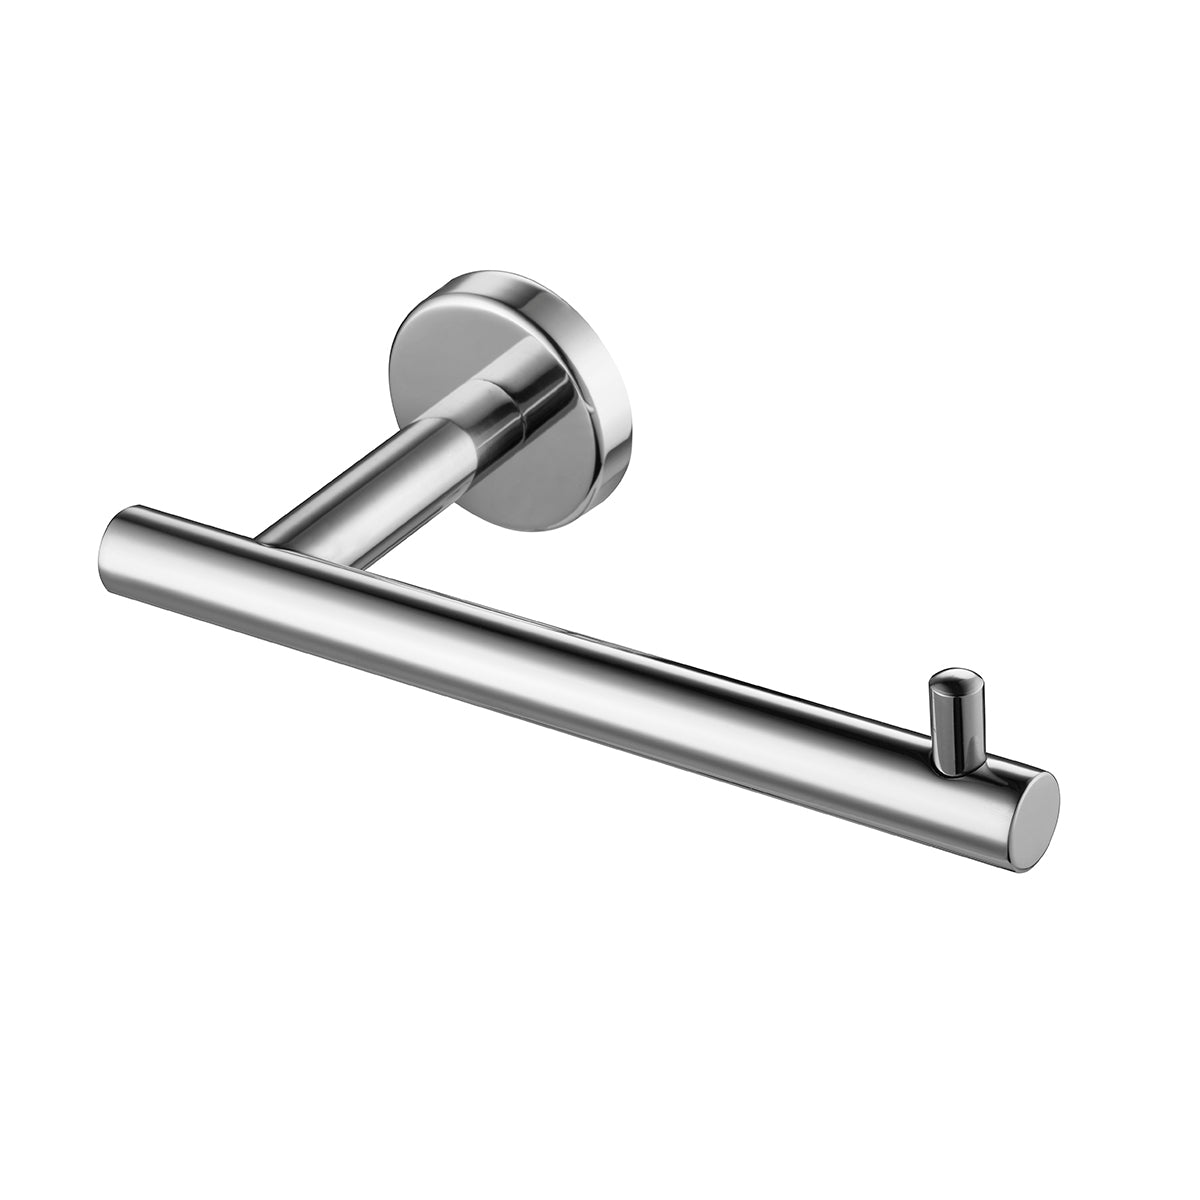 Polished Chrome Toilet Paper Holder Wall Mount Toilet Tissue Paper